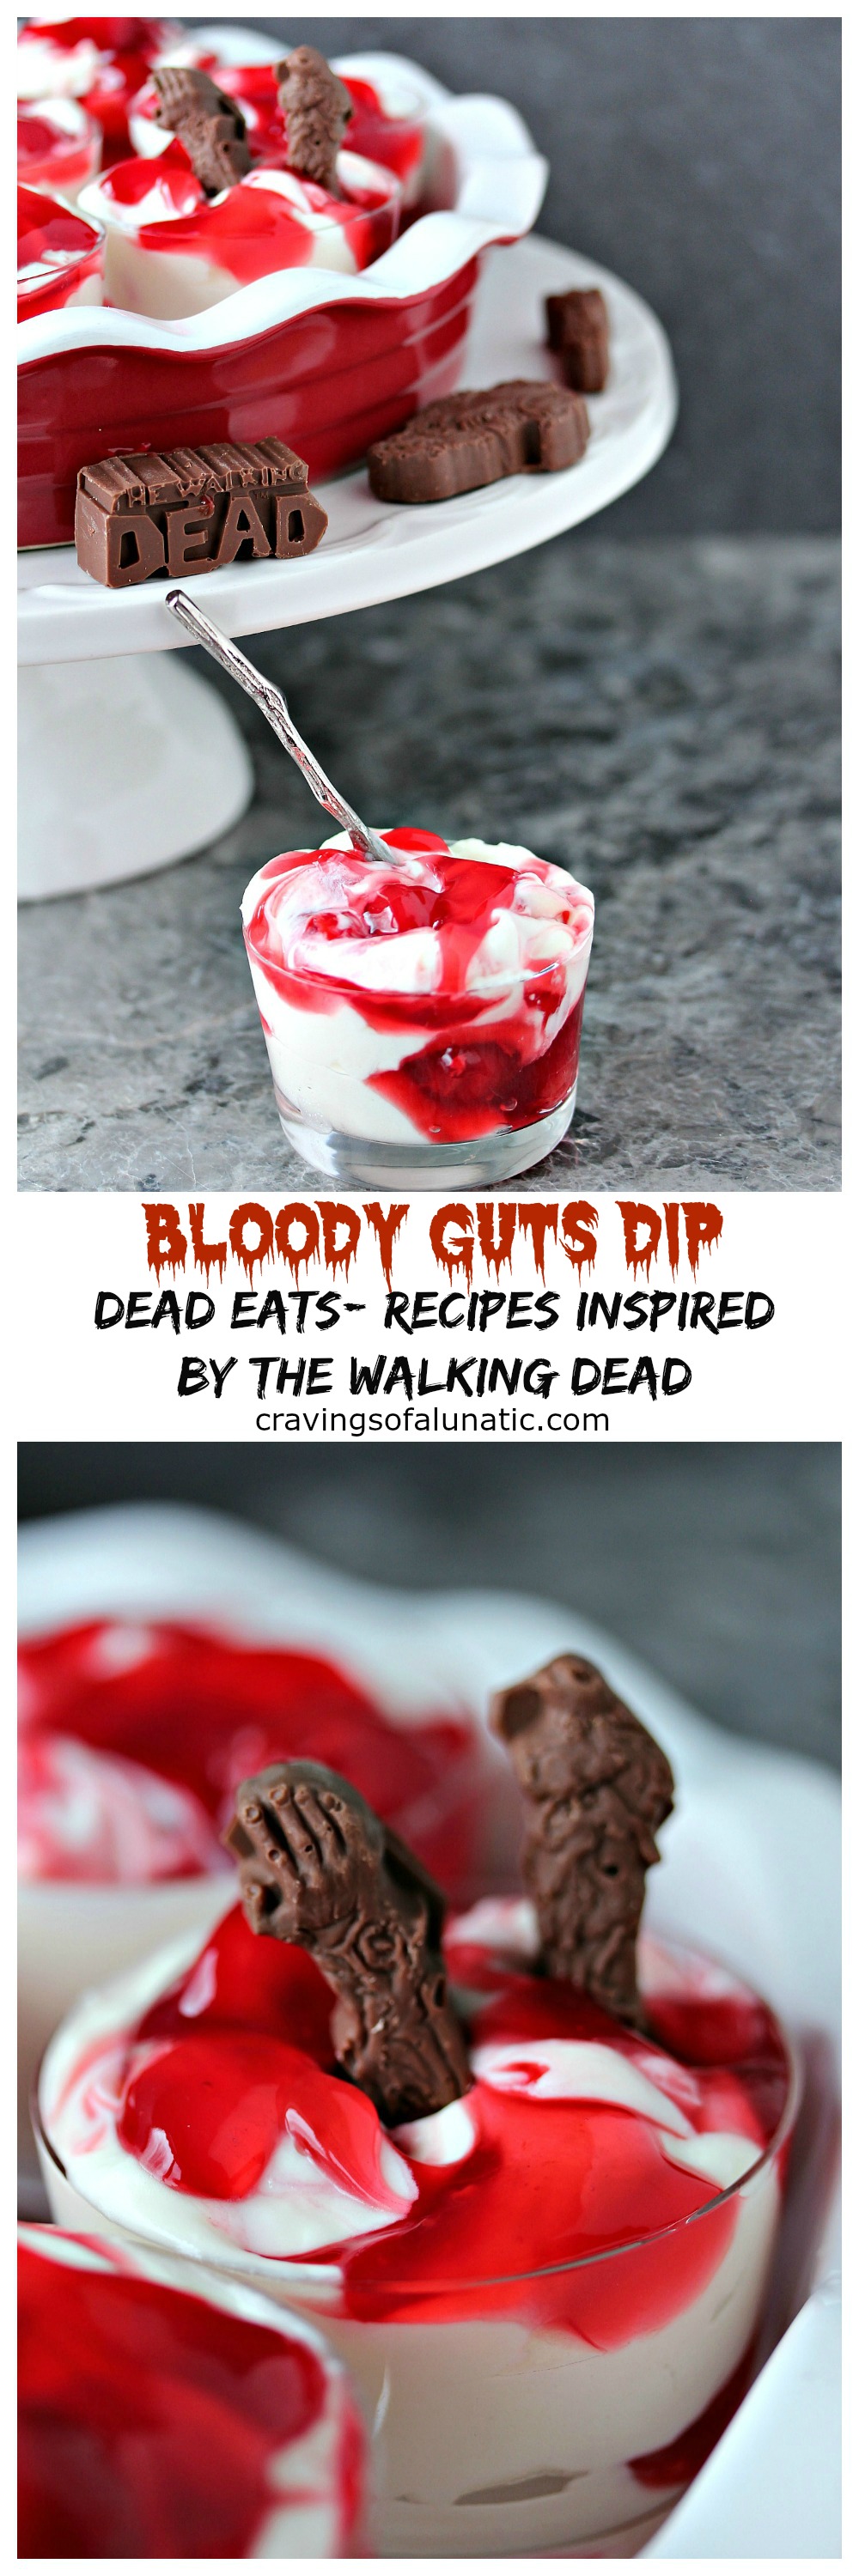 Bloody Guts Dip from cravingsofalunatic.com- Mix up this Bloody Guts Dip for your next Walking Dead Party. Celebrate in style by whipping up a batch of this easy cherry dip. Layer it so it looks like you're digging into a bloody mess. I made chocolate zombie body parts to use for dipping. (@CravingsLunatic)